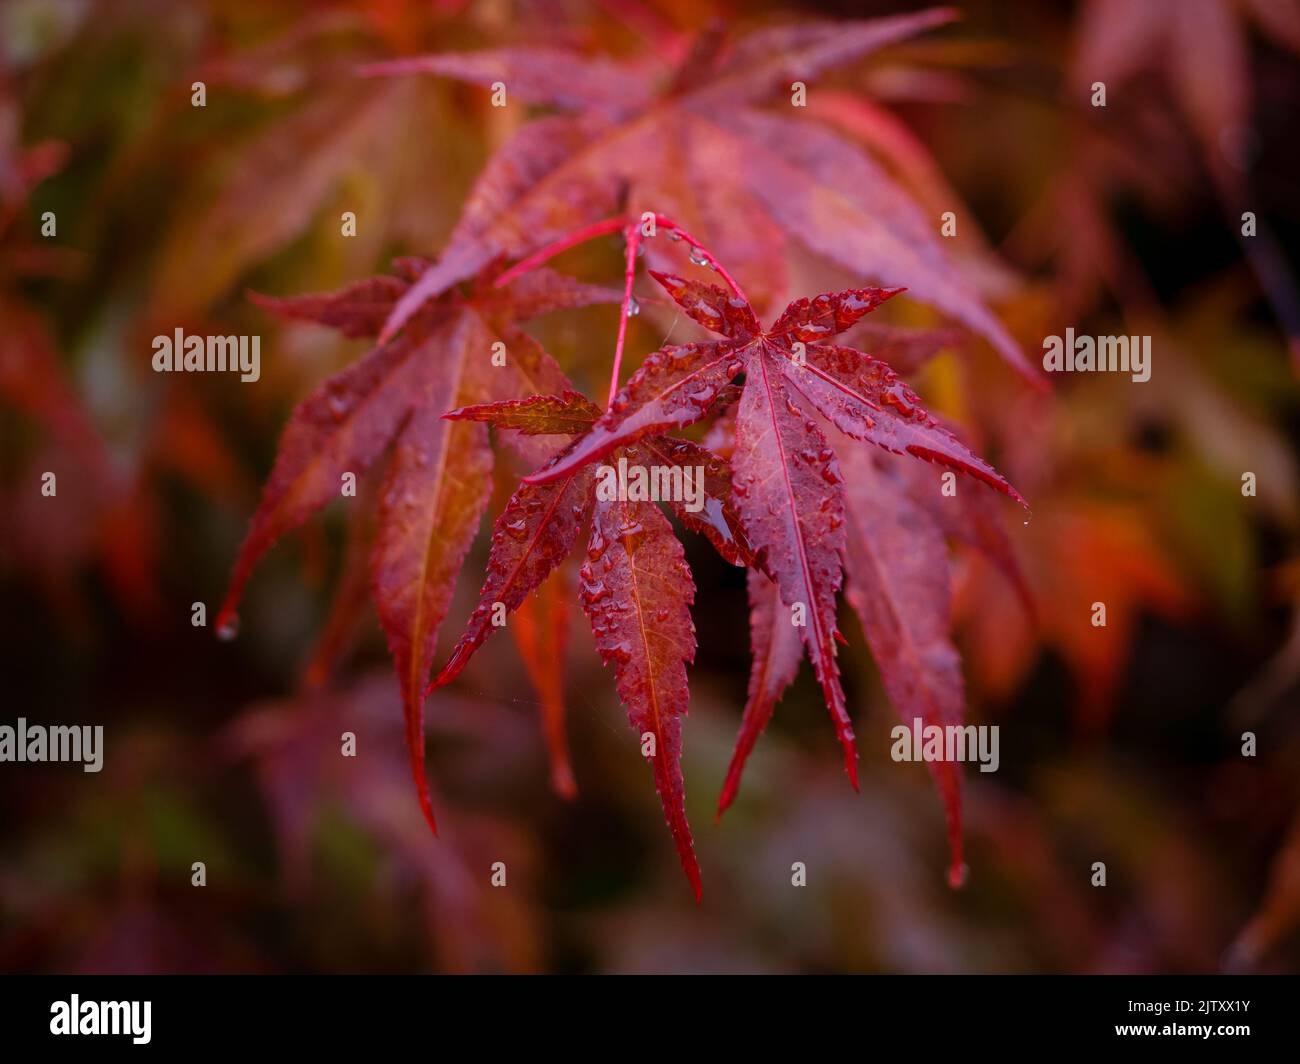 red maple tree leaves , close up photo of beautiful red autumn foliage. natural vibrant fall season colors Stock Photo